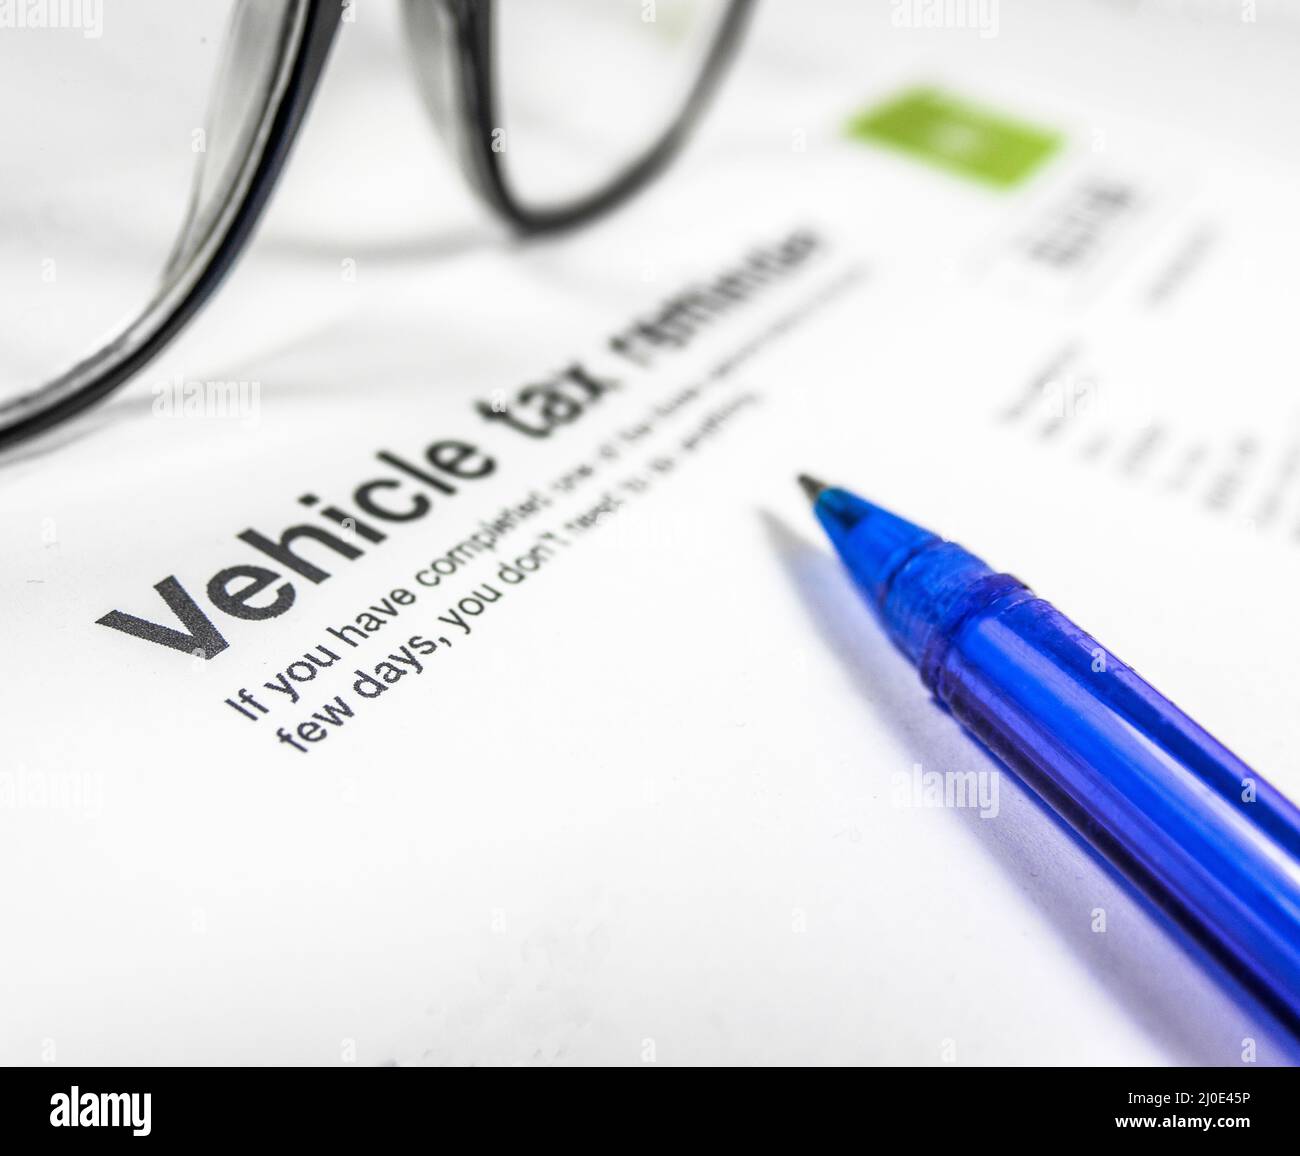 Vehicle Tax Reminder Letter Stock Photo